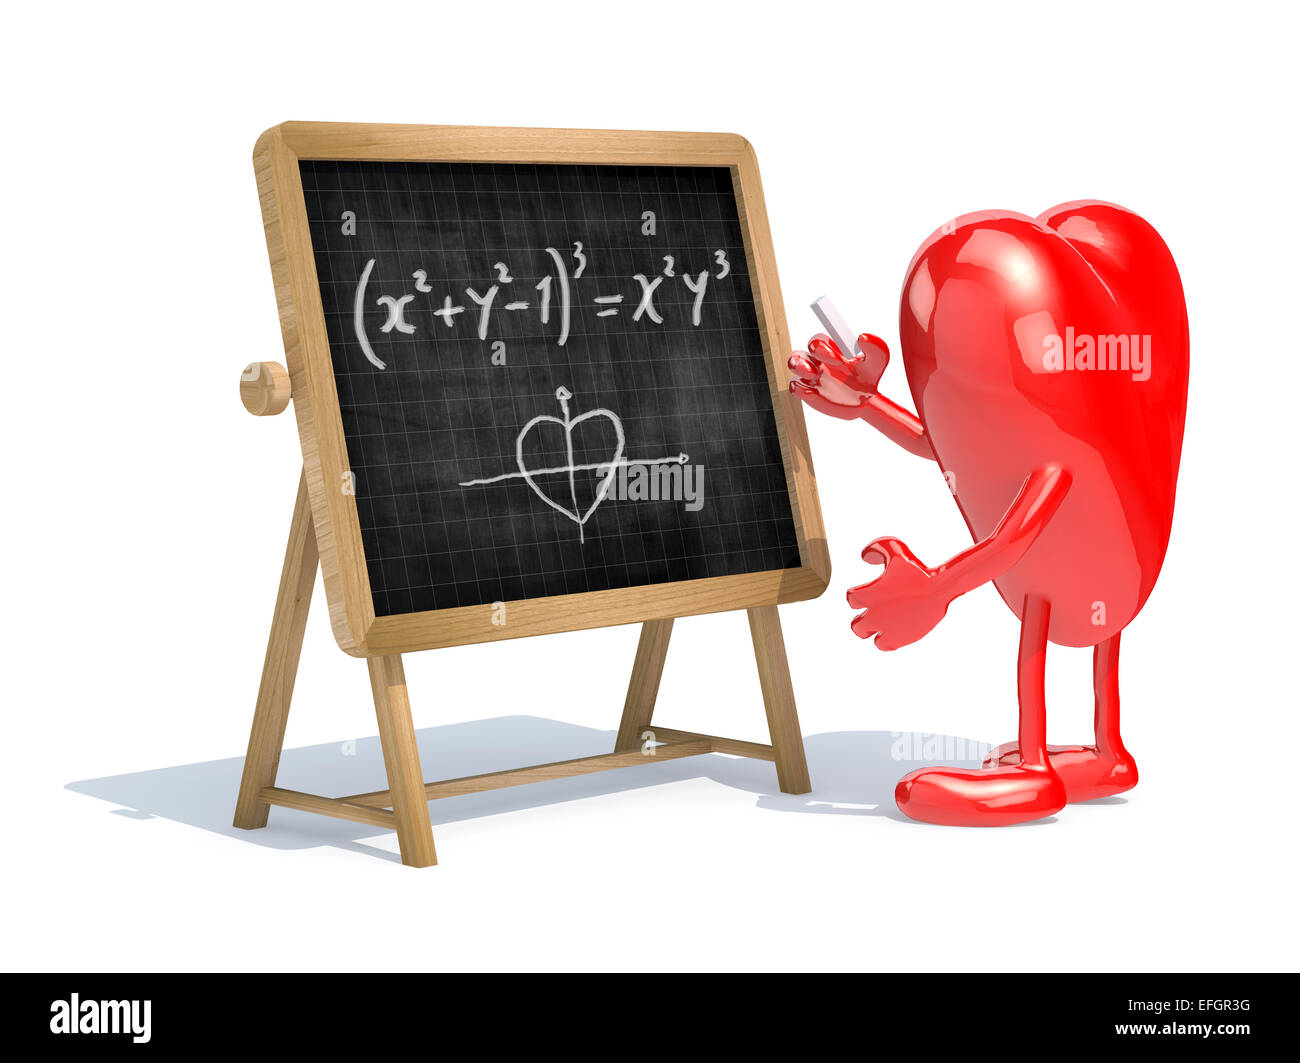 heart with his arms and legs in front of the blackboard writing a mathematical formula Stock Photo